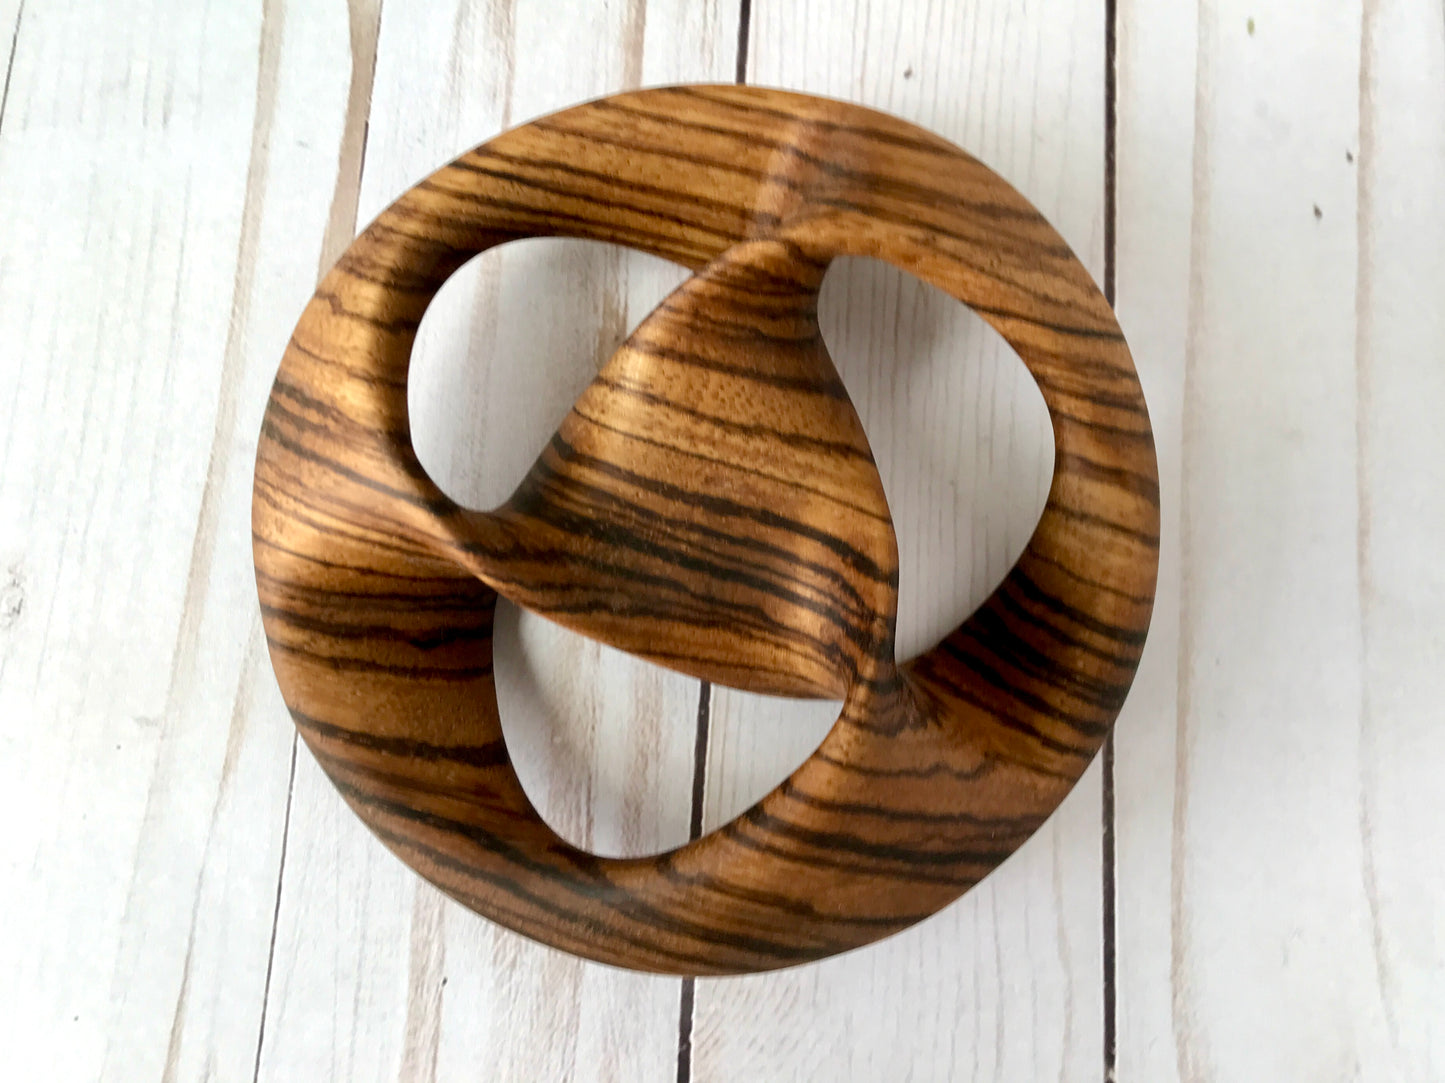 Triquetra Mobius Strip-like Wooden Sculpture, ZebraWood, 5"